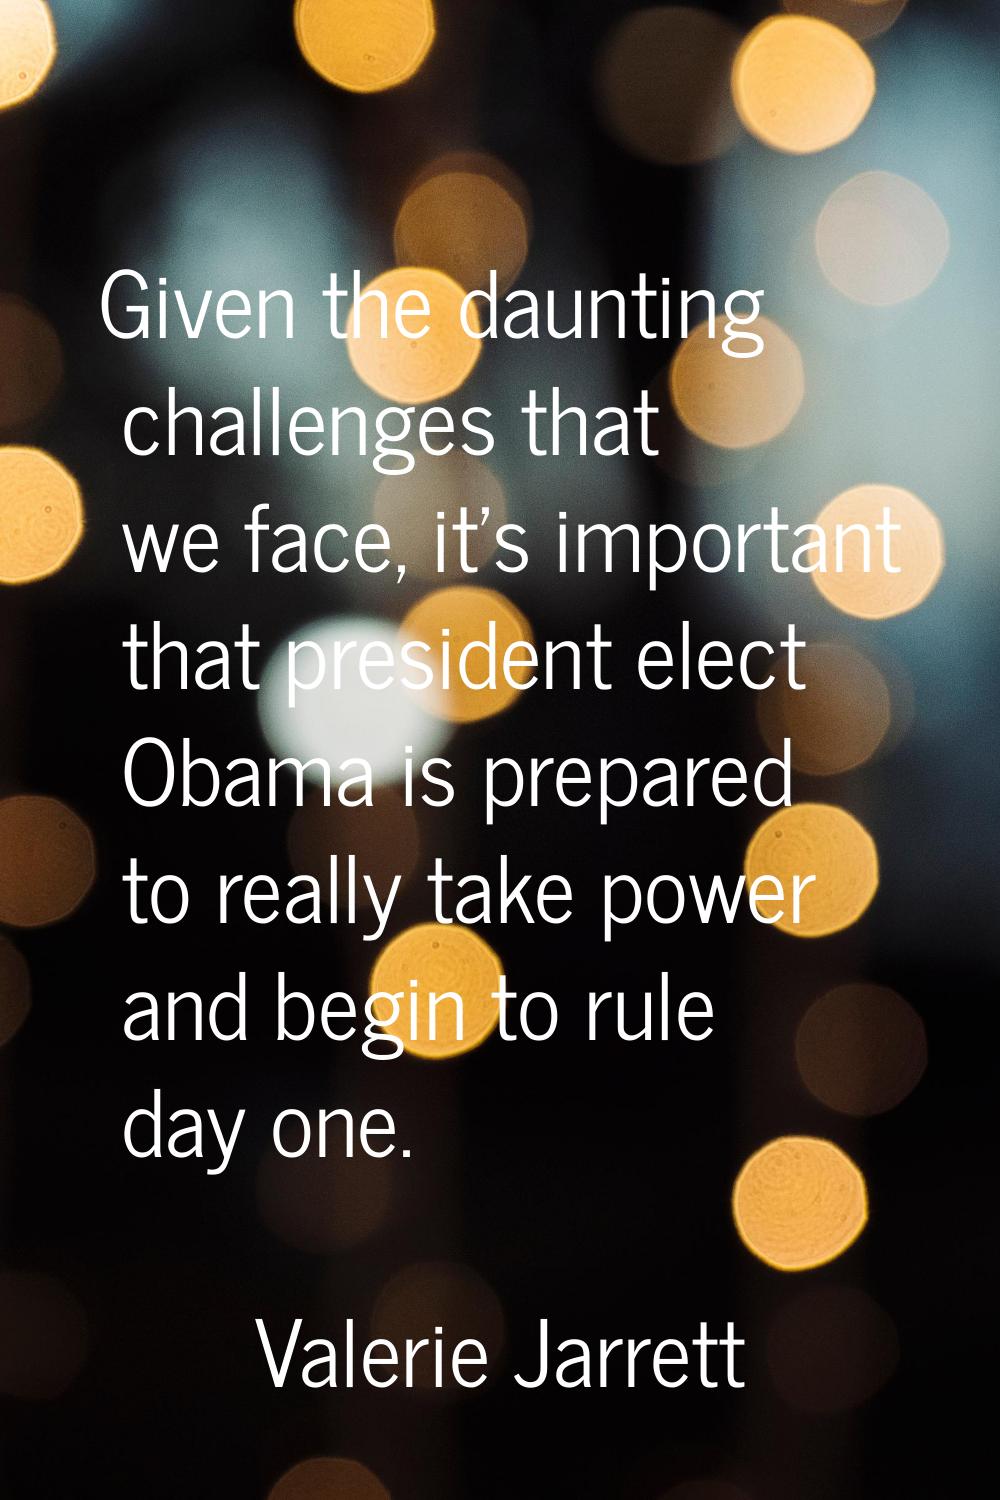 Given the daunting challenges that we face, it's important that president elect Obama is prepared t